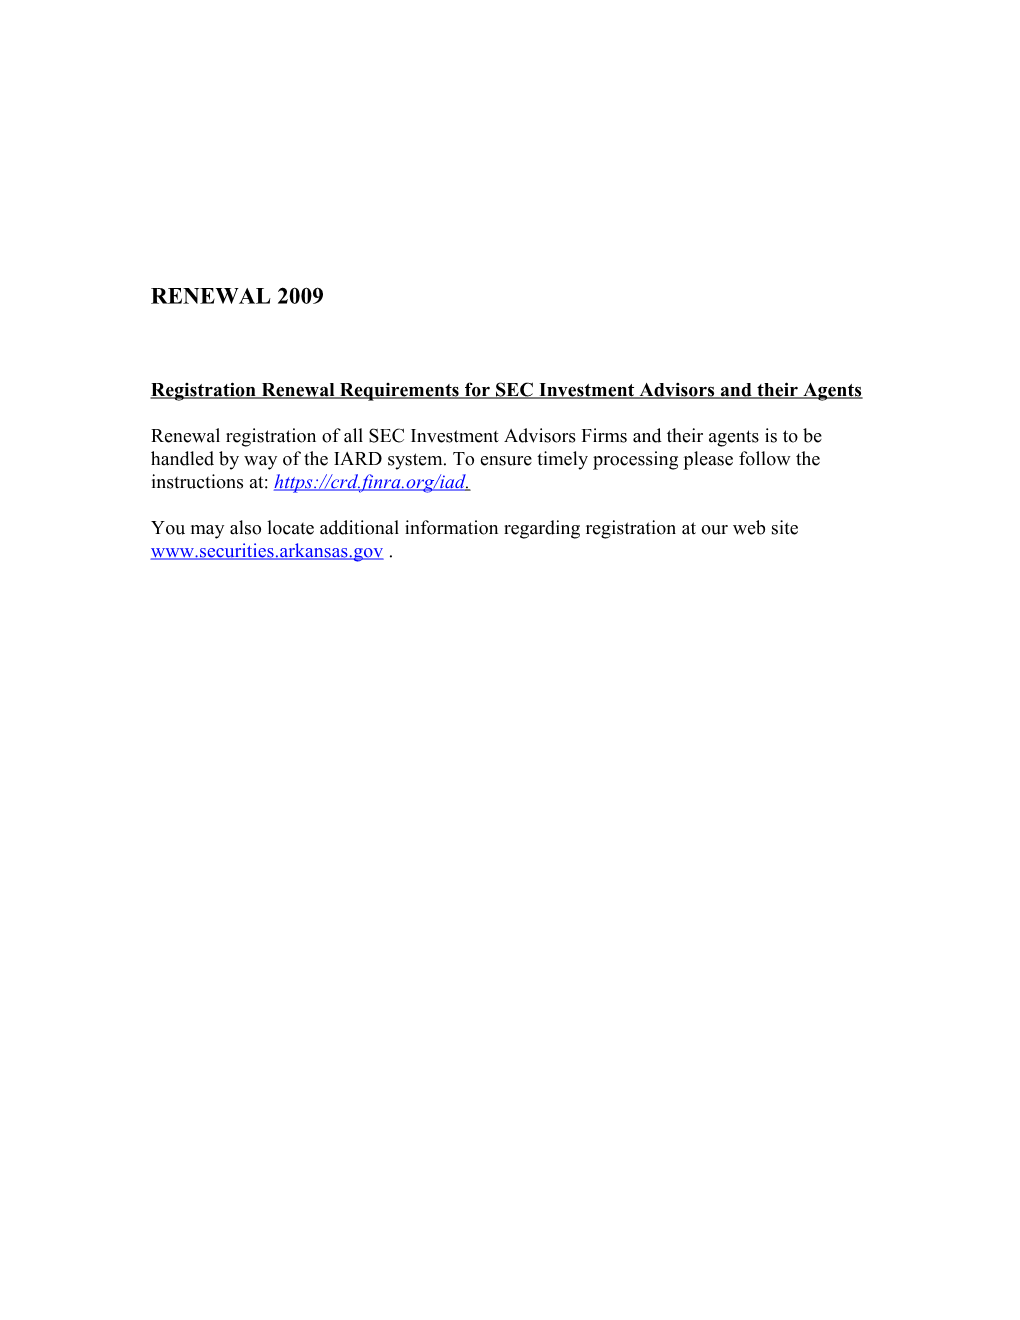 Registration Renewal Requirements for SEC Investment Advisors and Their Agents